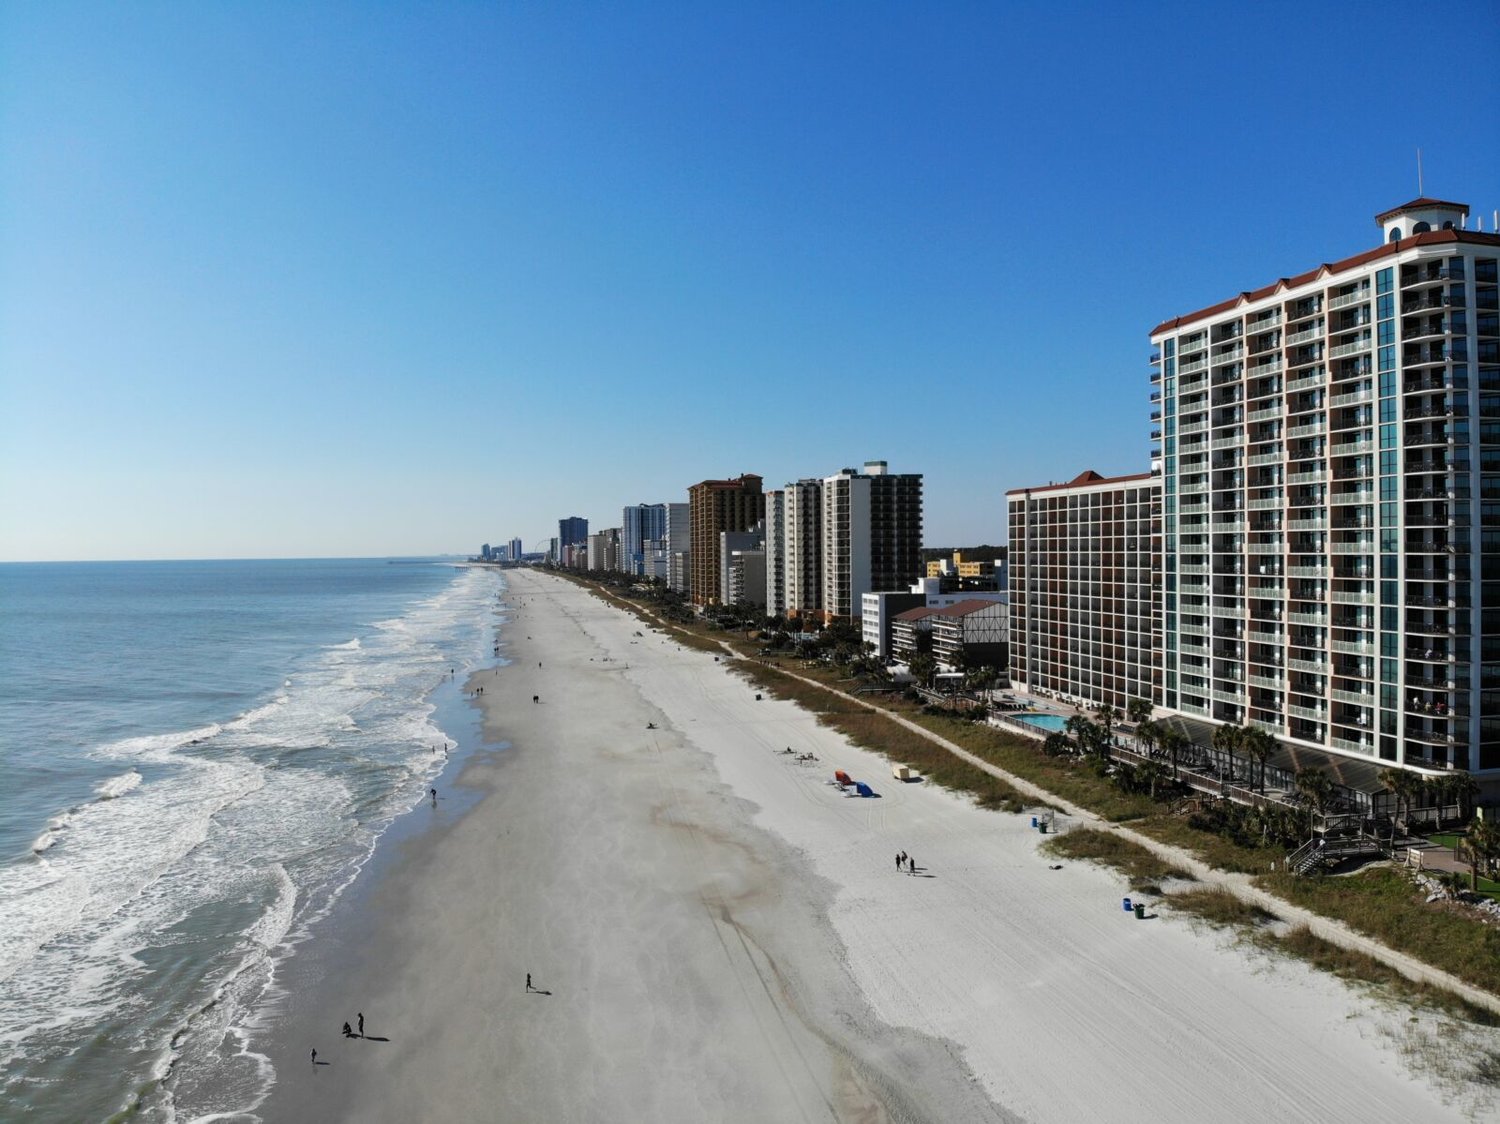 As for a lot of the East Coast shoreline, condominiums are very popular.